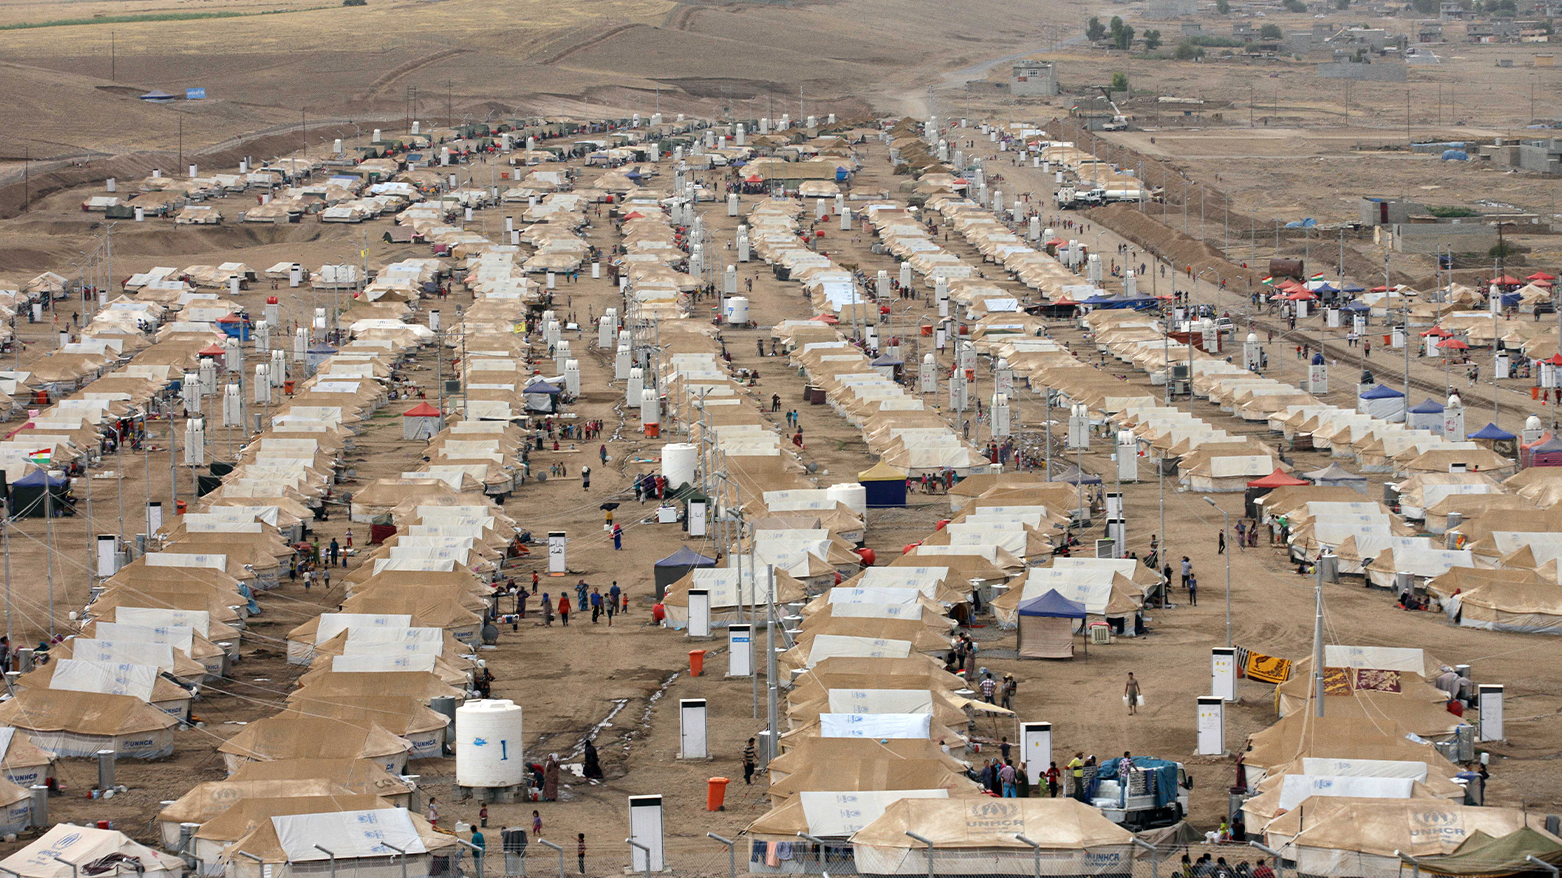 A general view of the Kawergost refugee camp in Irbil. (Photo: AP)